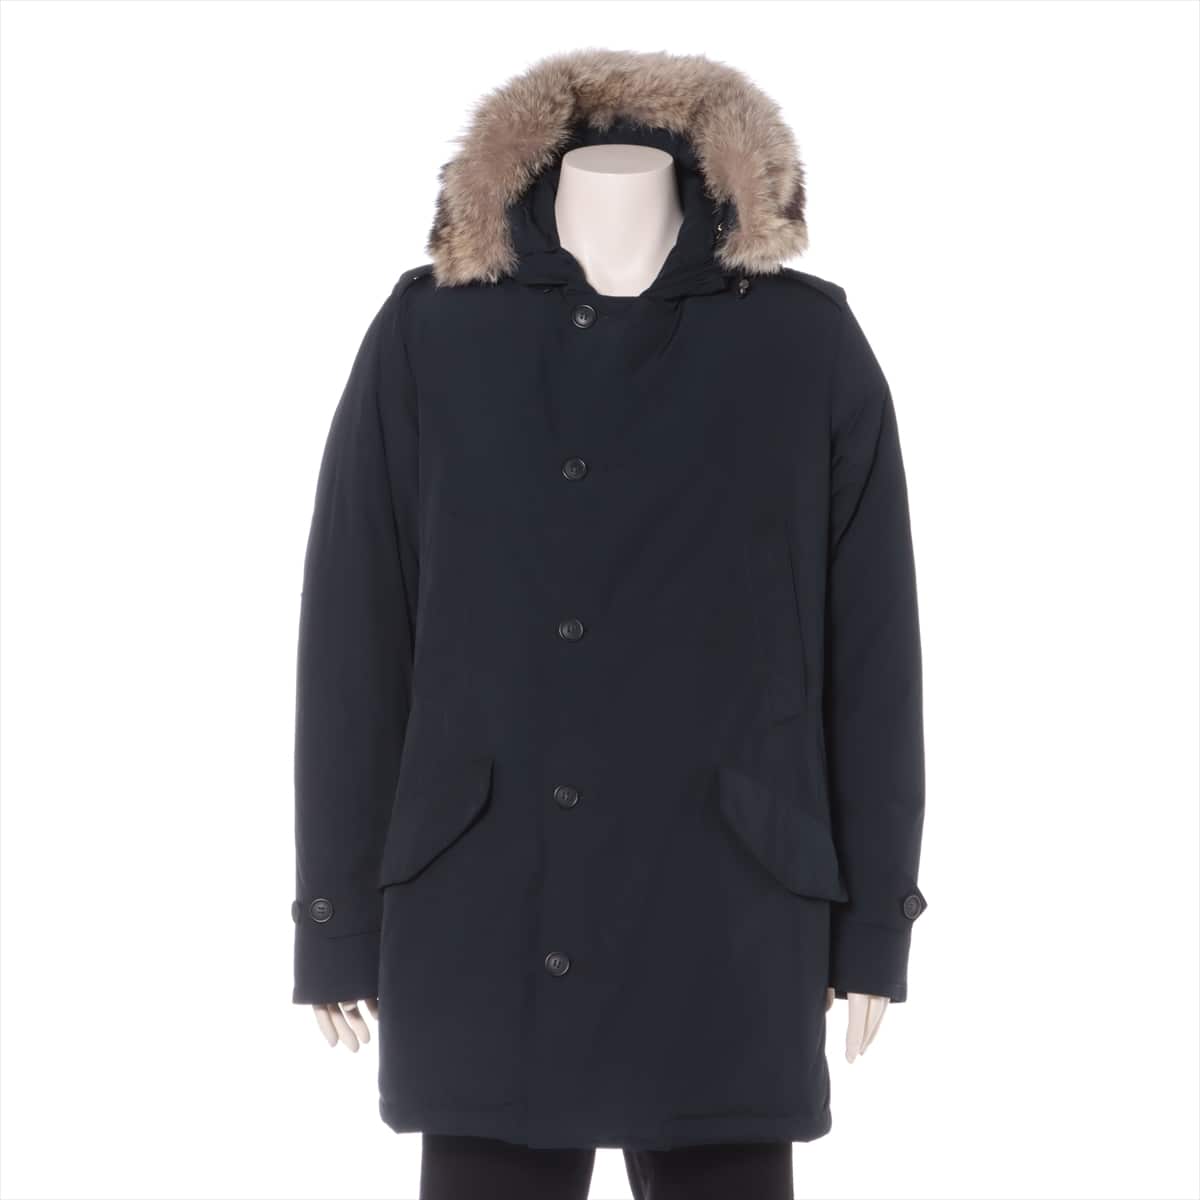 Woolrich Polyester & nylon Down coat S Men's Navy blue  Removable fur